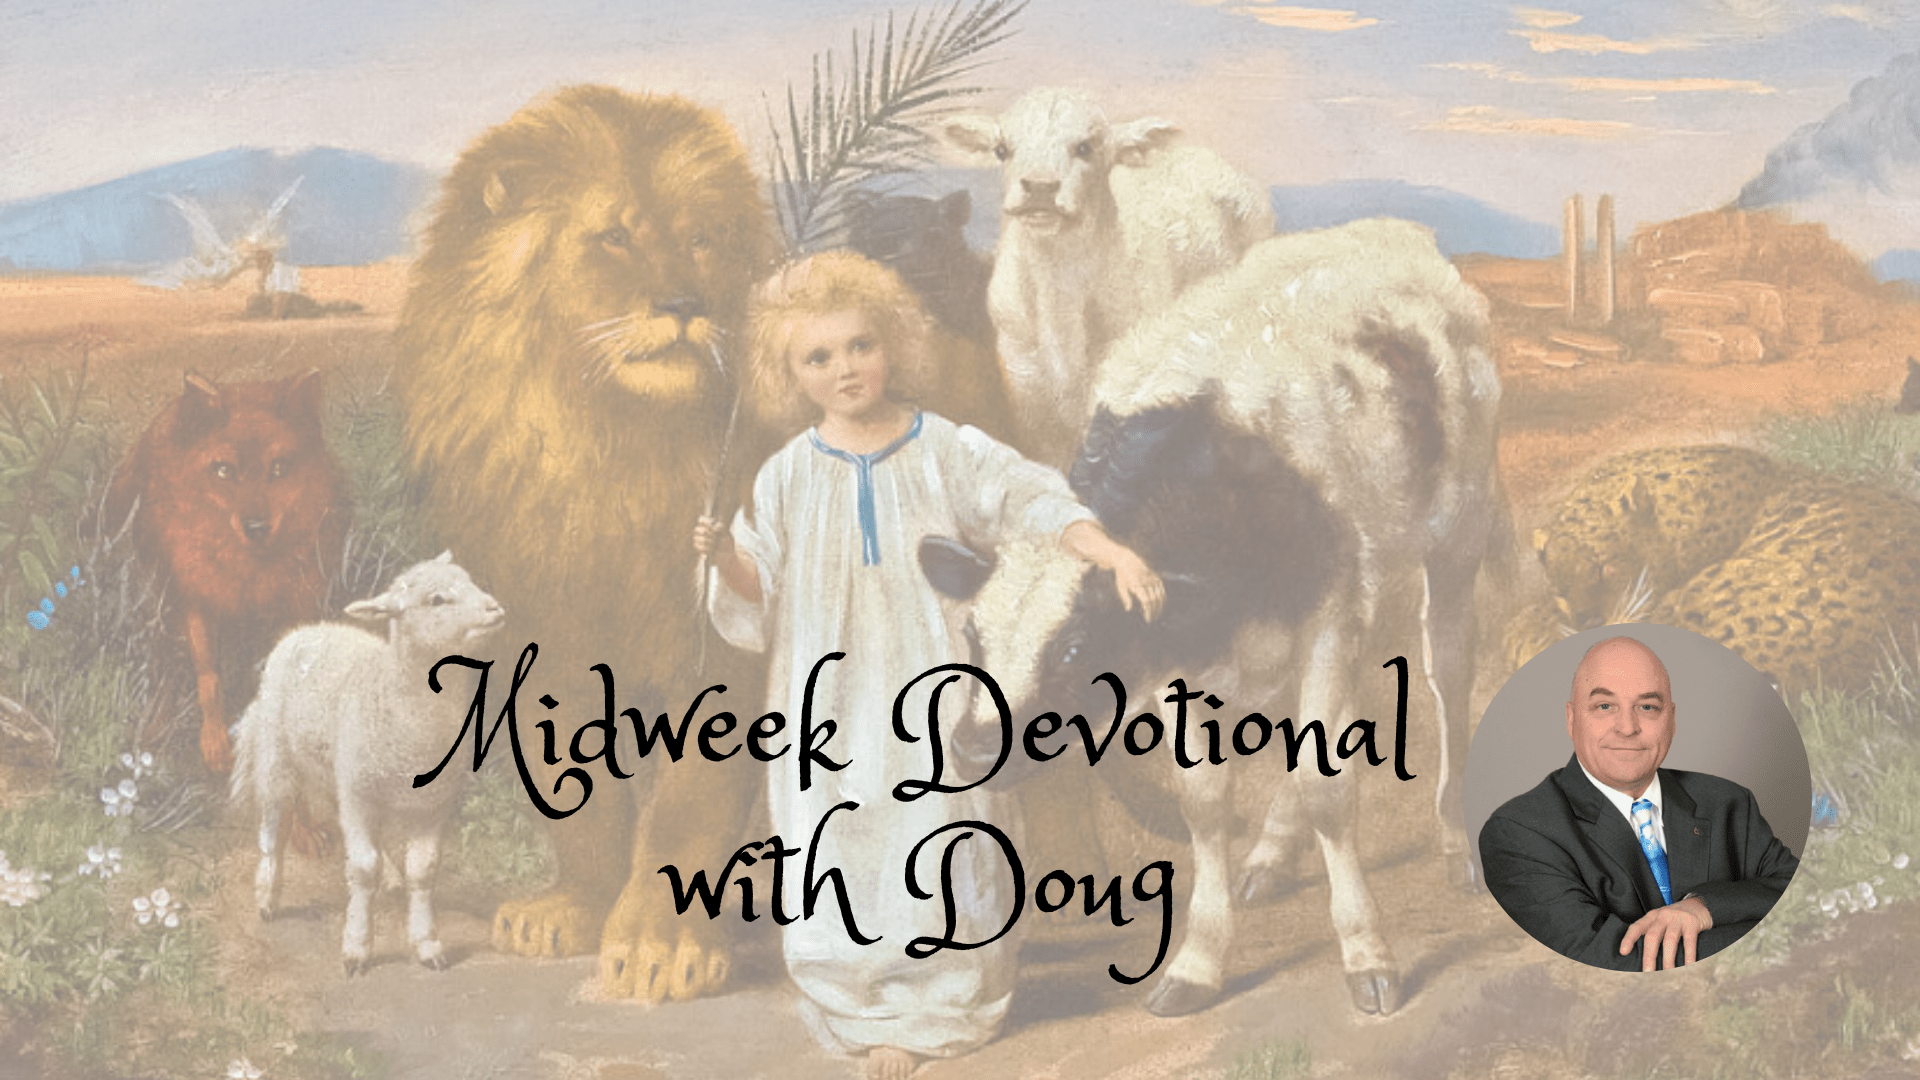 Midweek Devotional with Doug fourth week in July